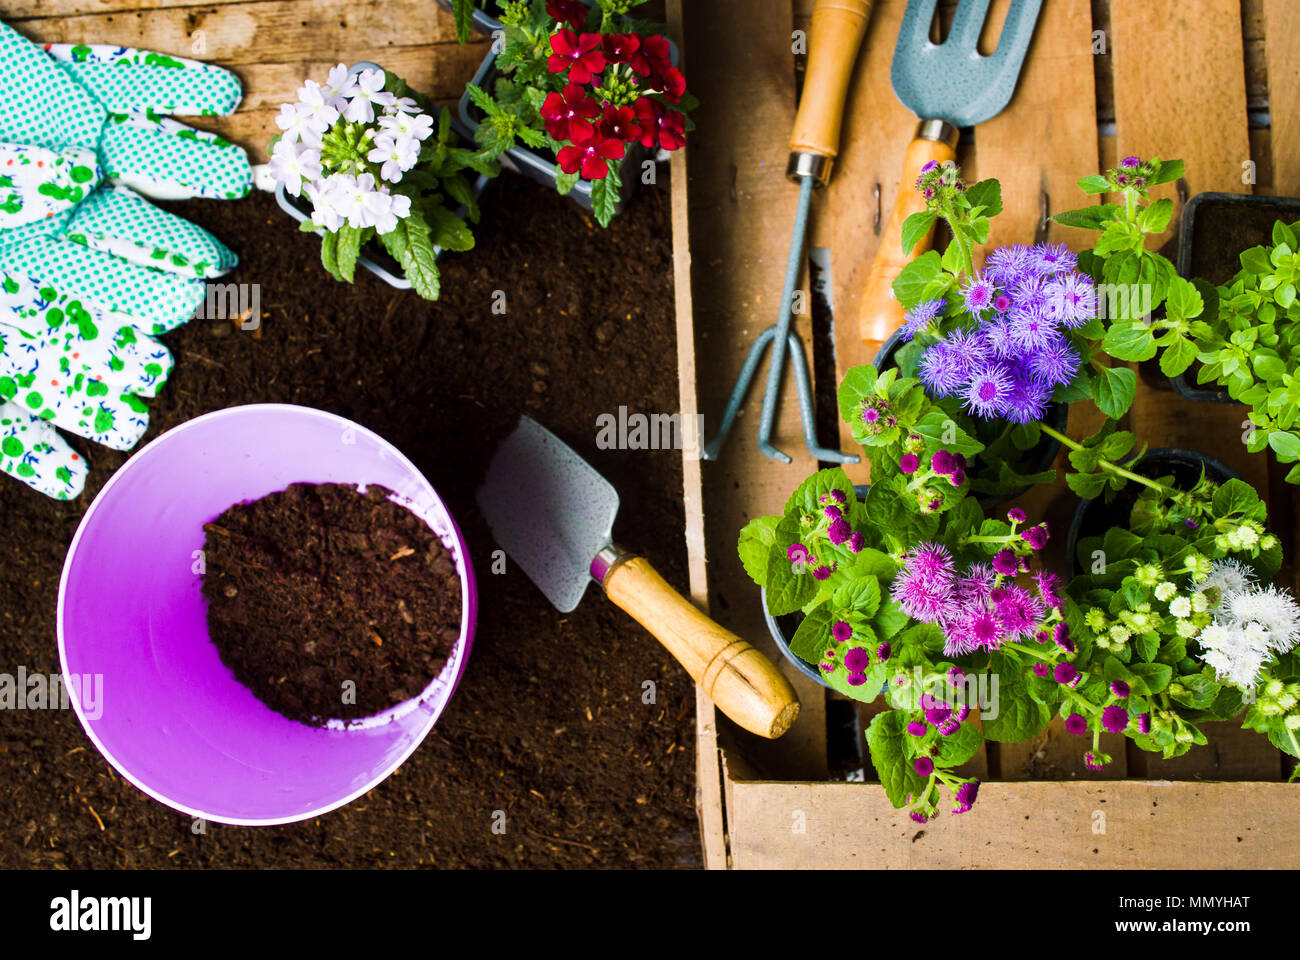 Colorful flowers and gardening tools in the soil top view Stock Photo